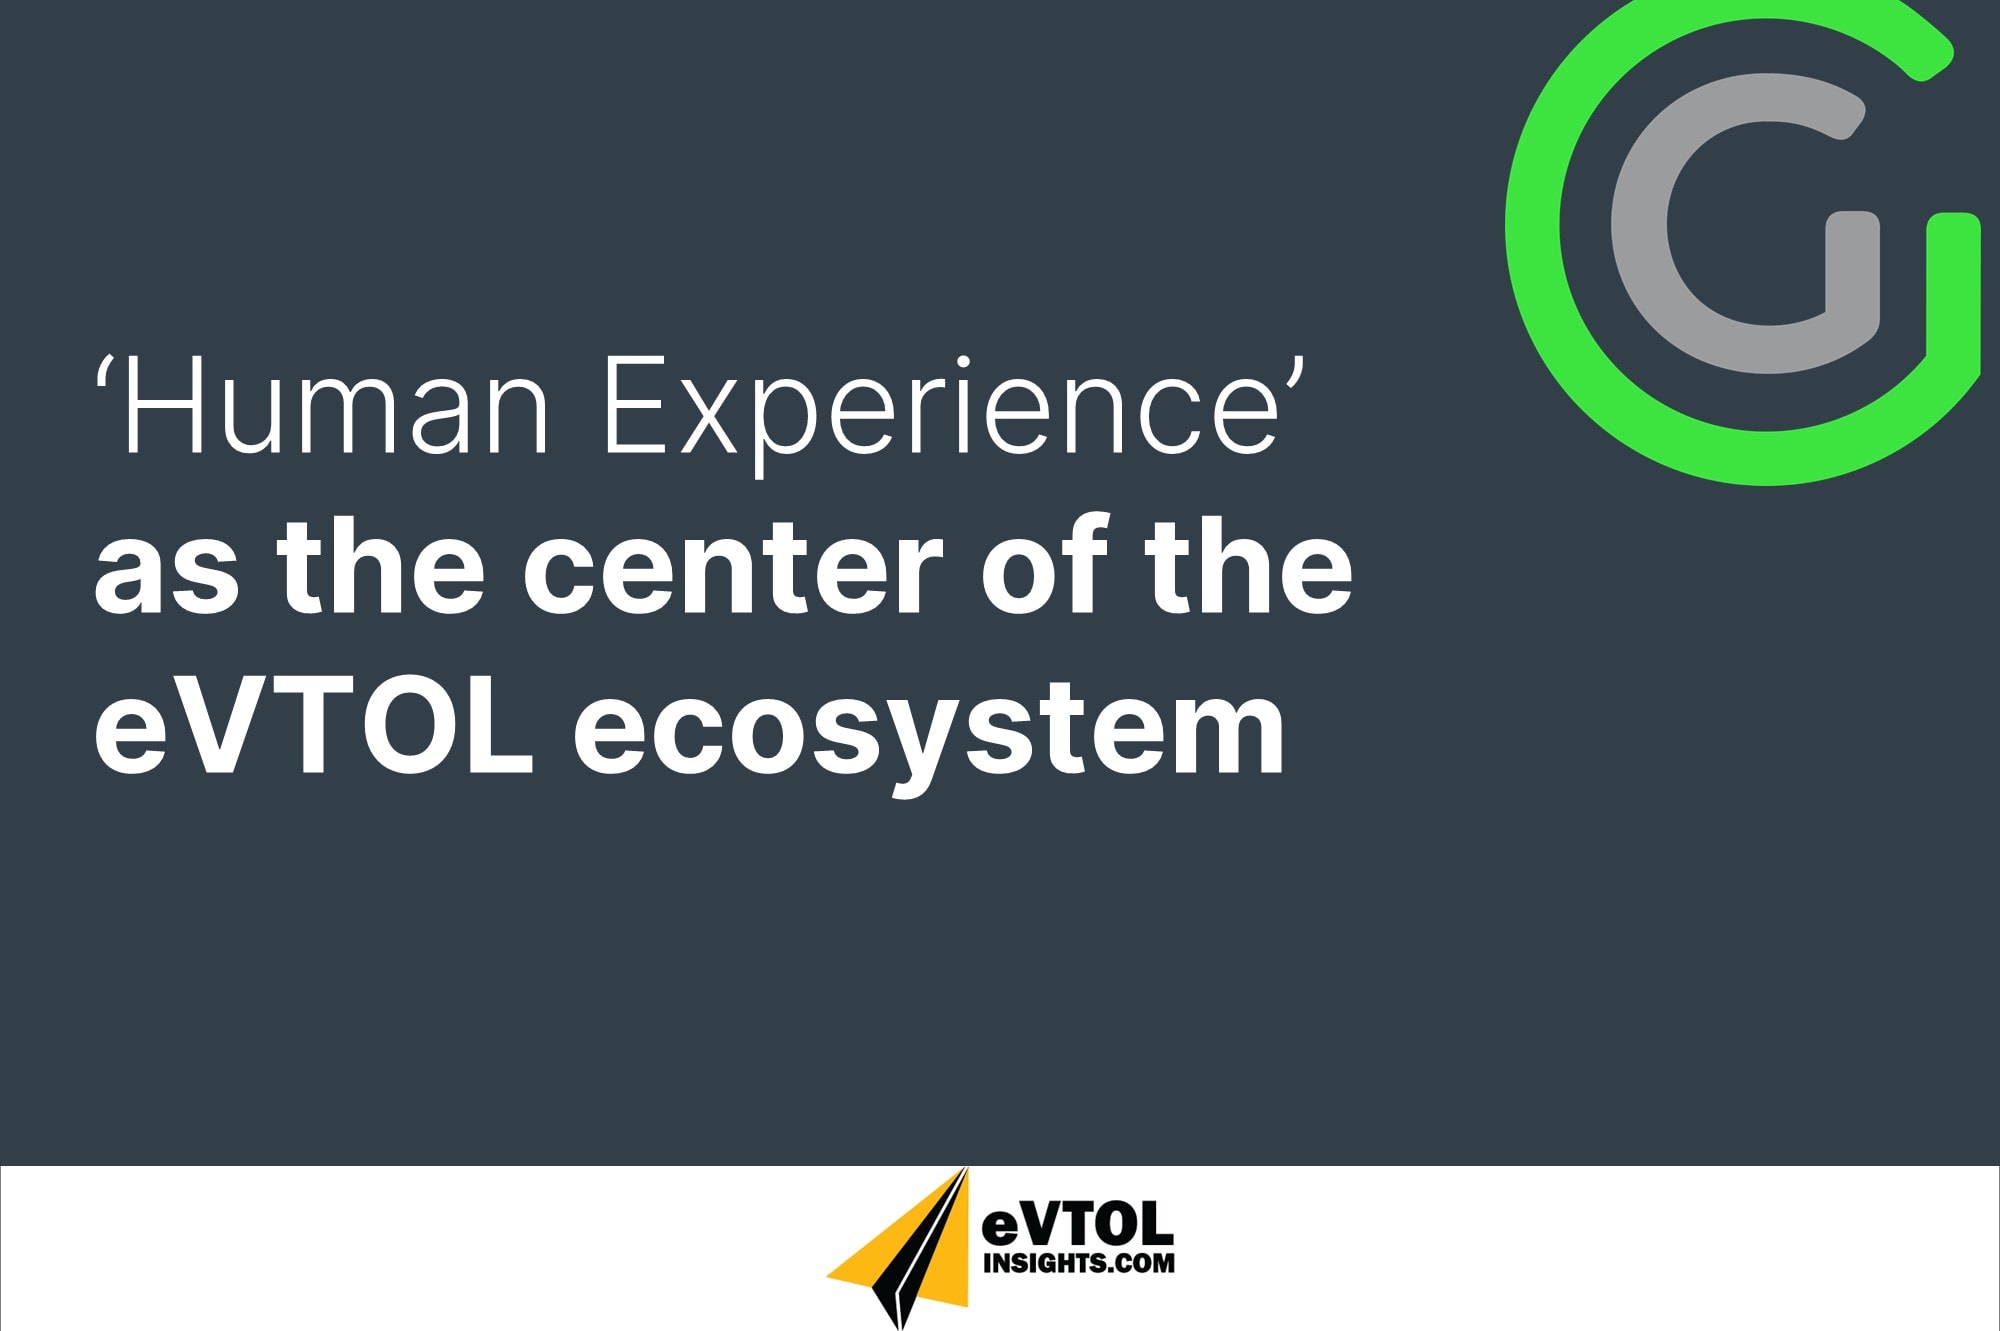 Podcast: “The ‘Human Experience’ as the Center of the eVTOL Ecosystem”